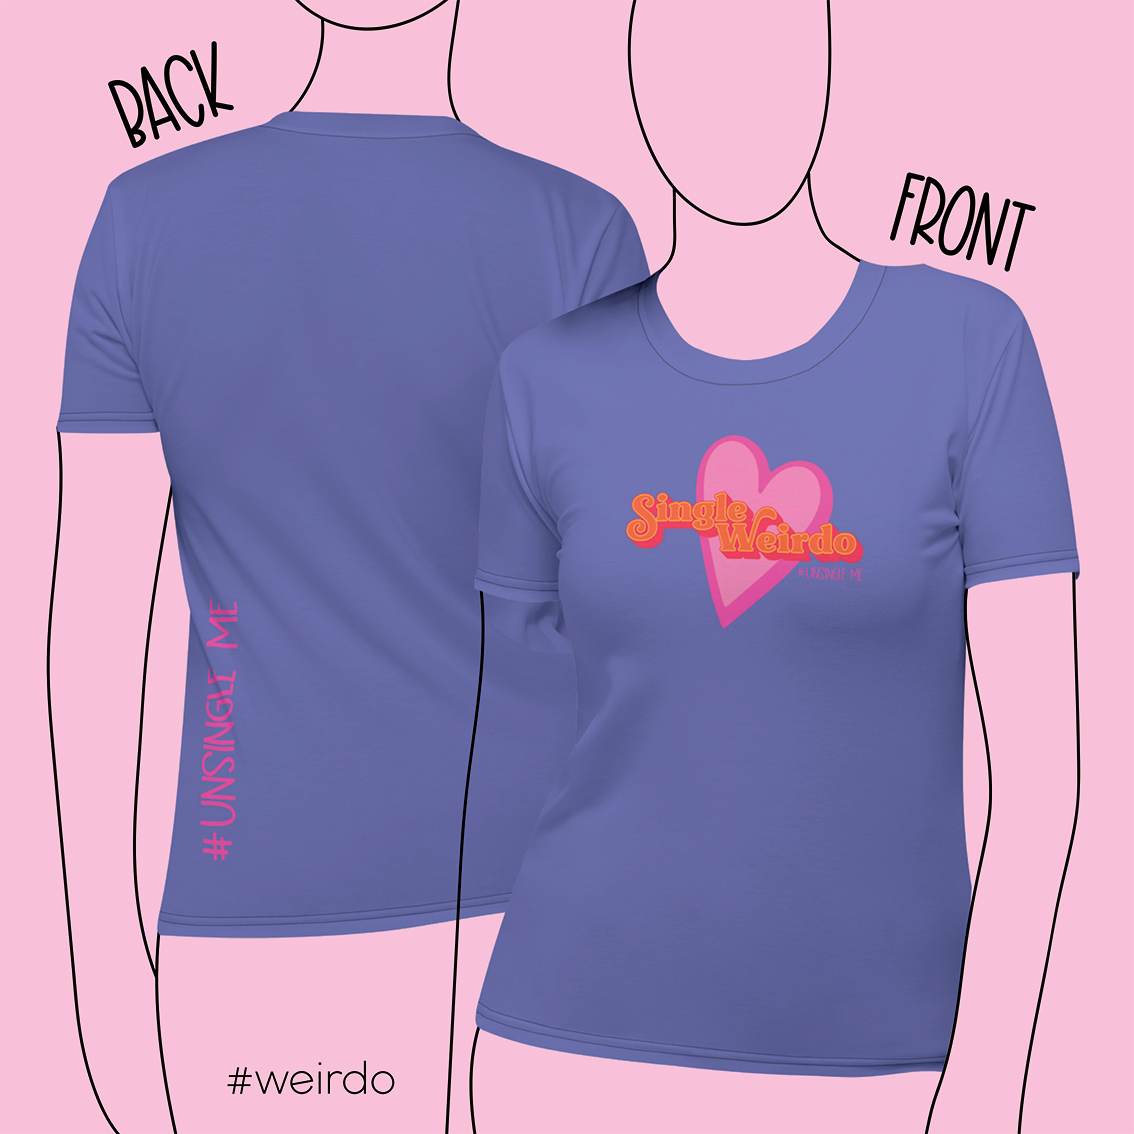 #WEIRDO | This t-shirt will help you to get more contact with single people! From our Single Weirdo collection!